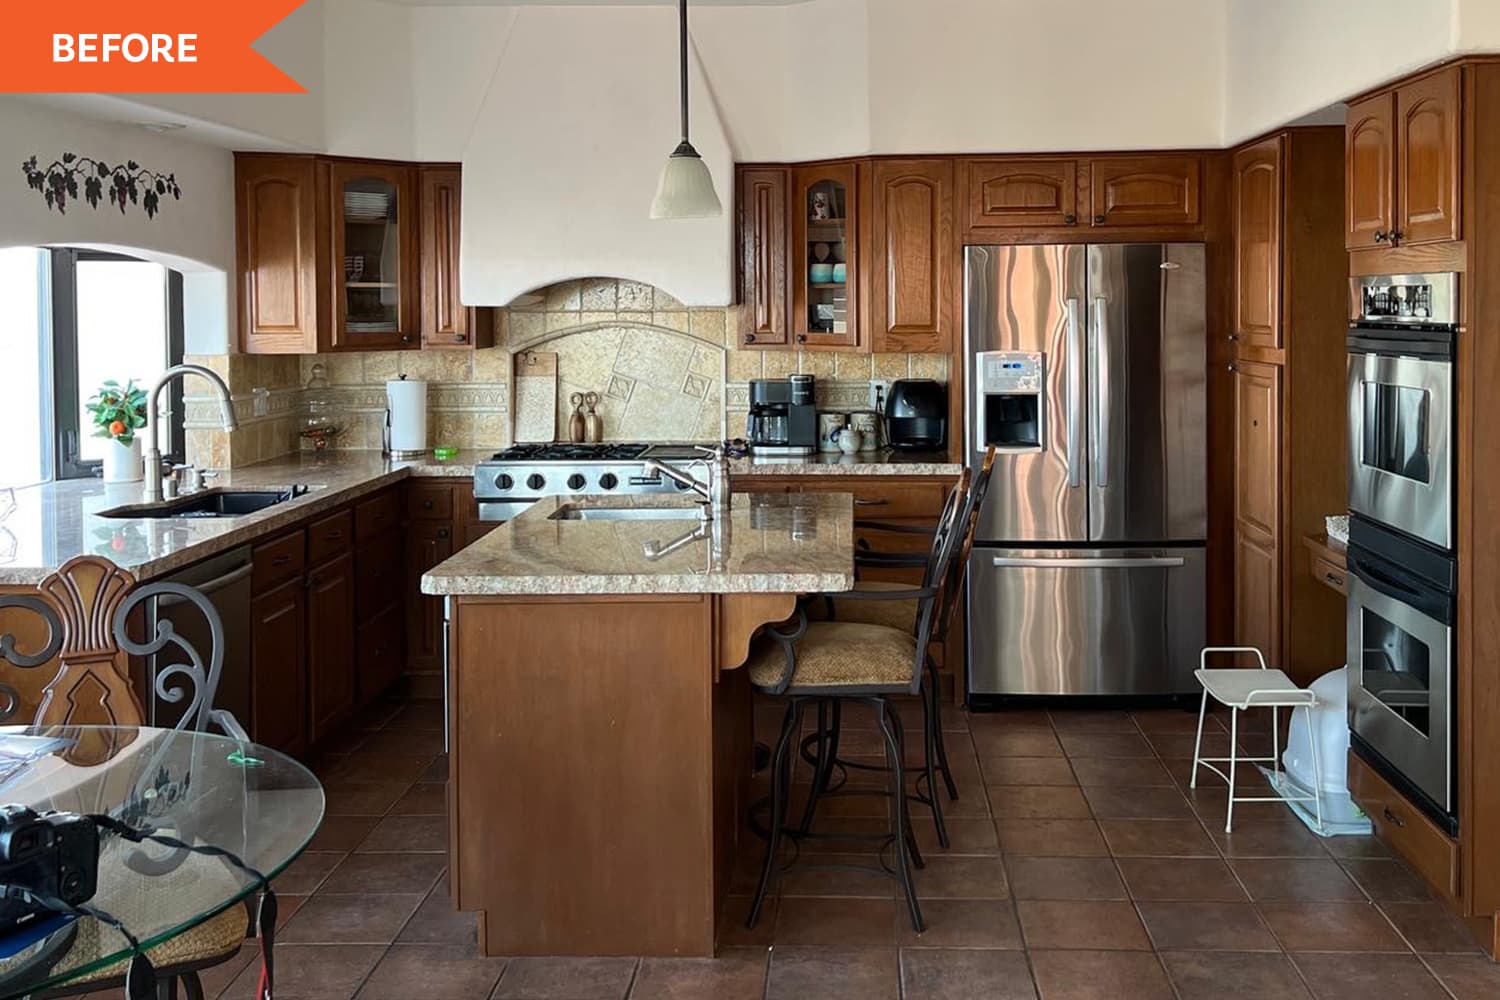 Before and After: Painting the Cabinets in This Kitchen Made Everything Look New Again